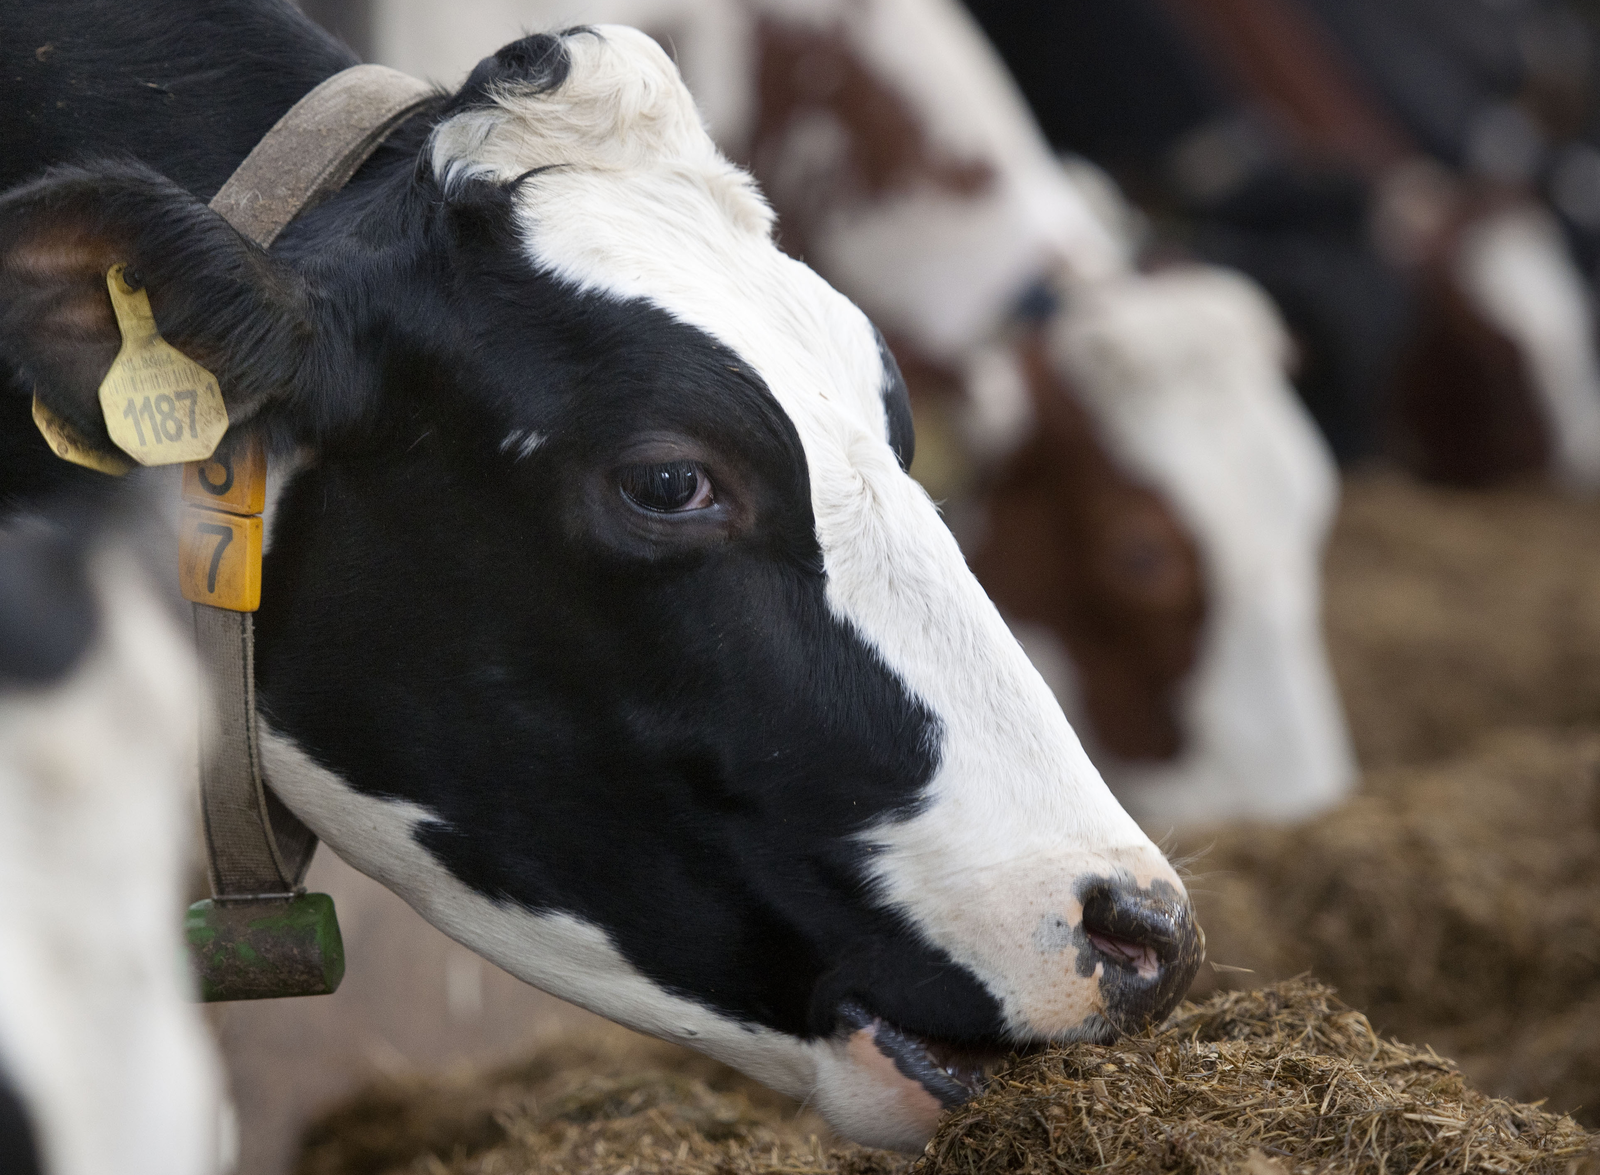 Canada confirms BSE case is related to feed